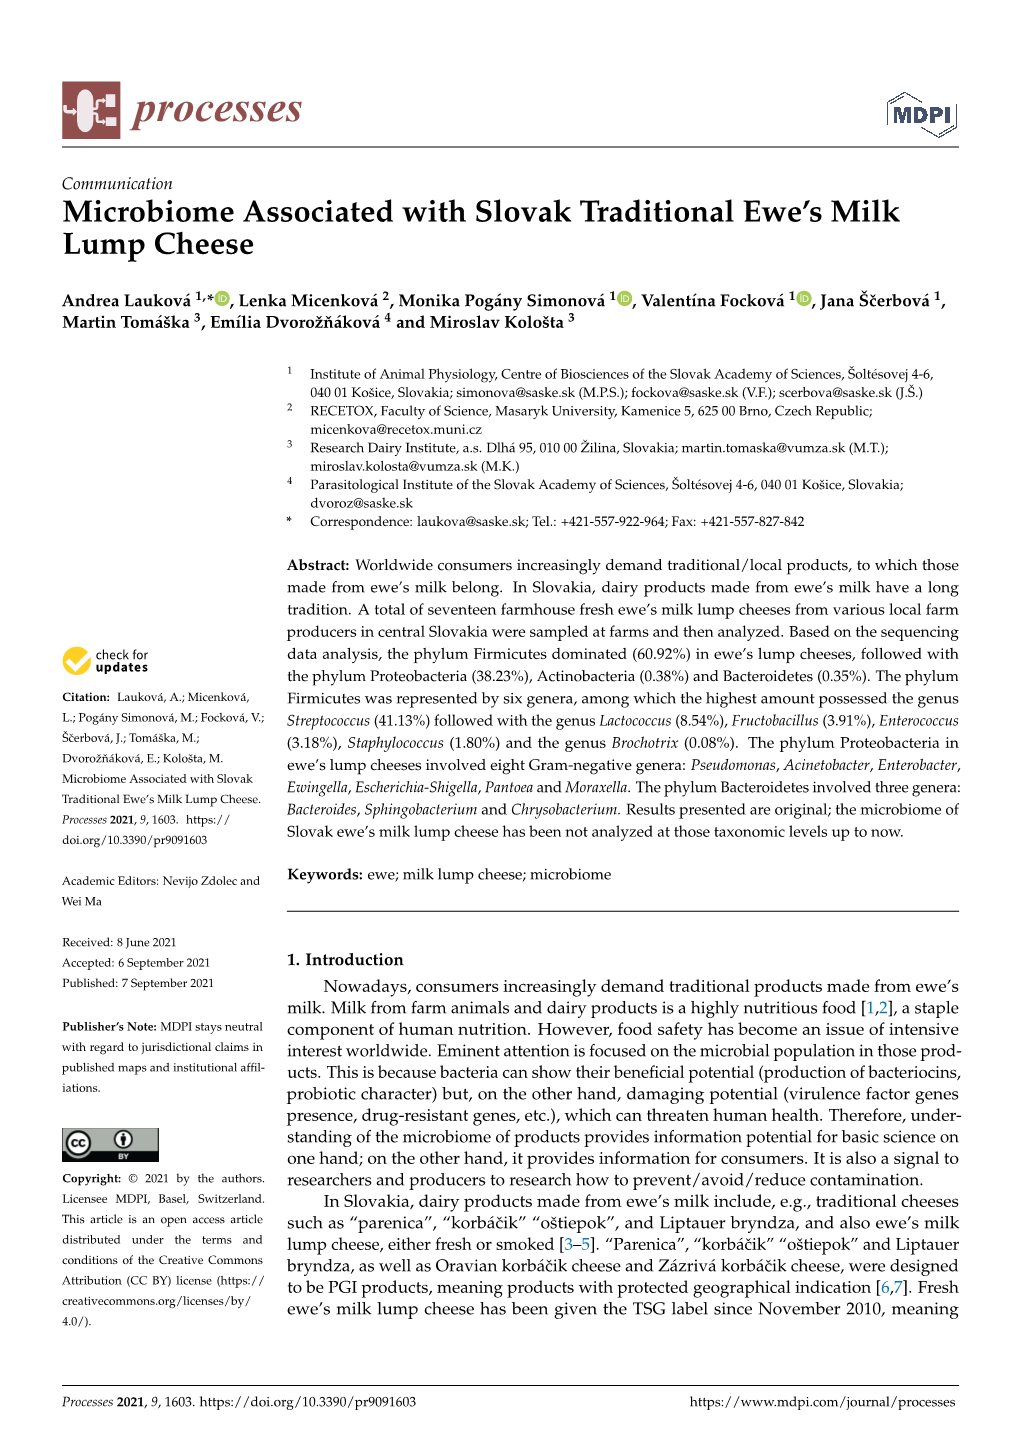 Microbiome Associated with Slovak Traditional Ewe's Milk Lump Cheese